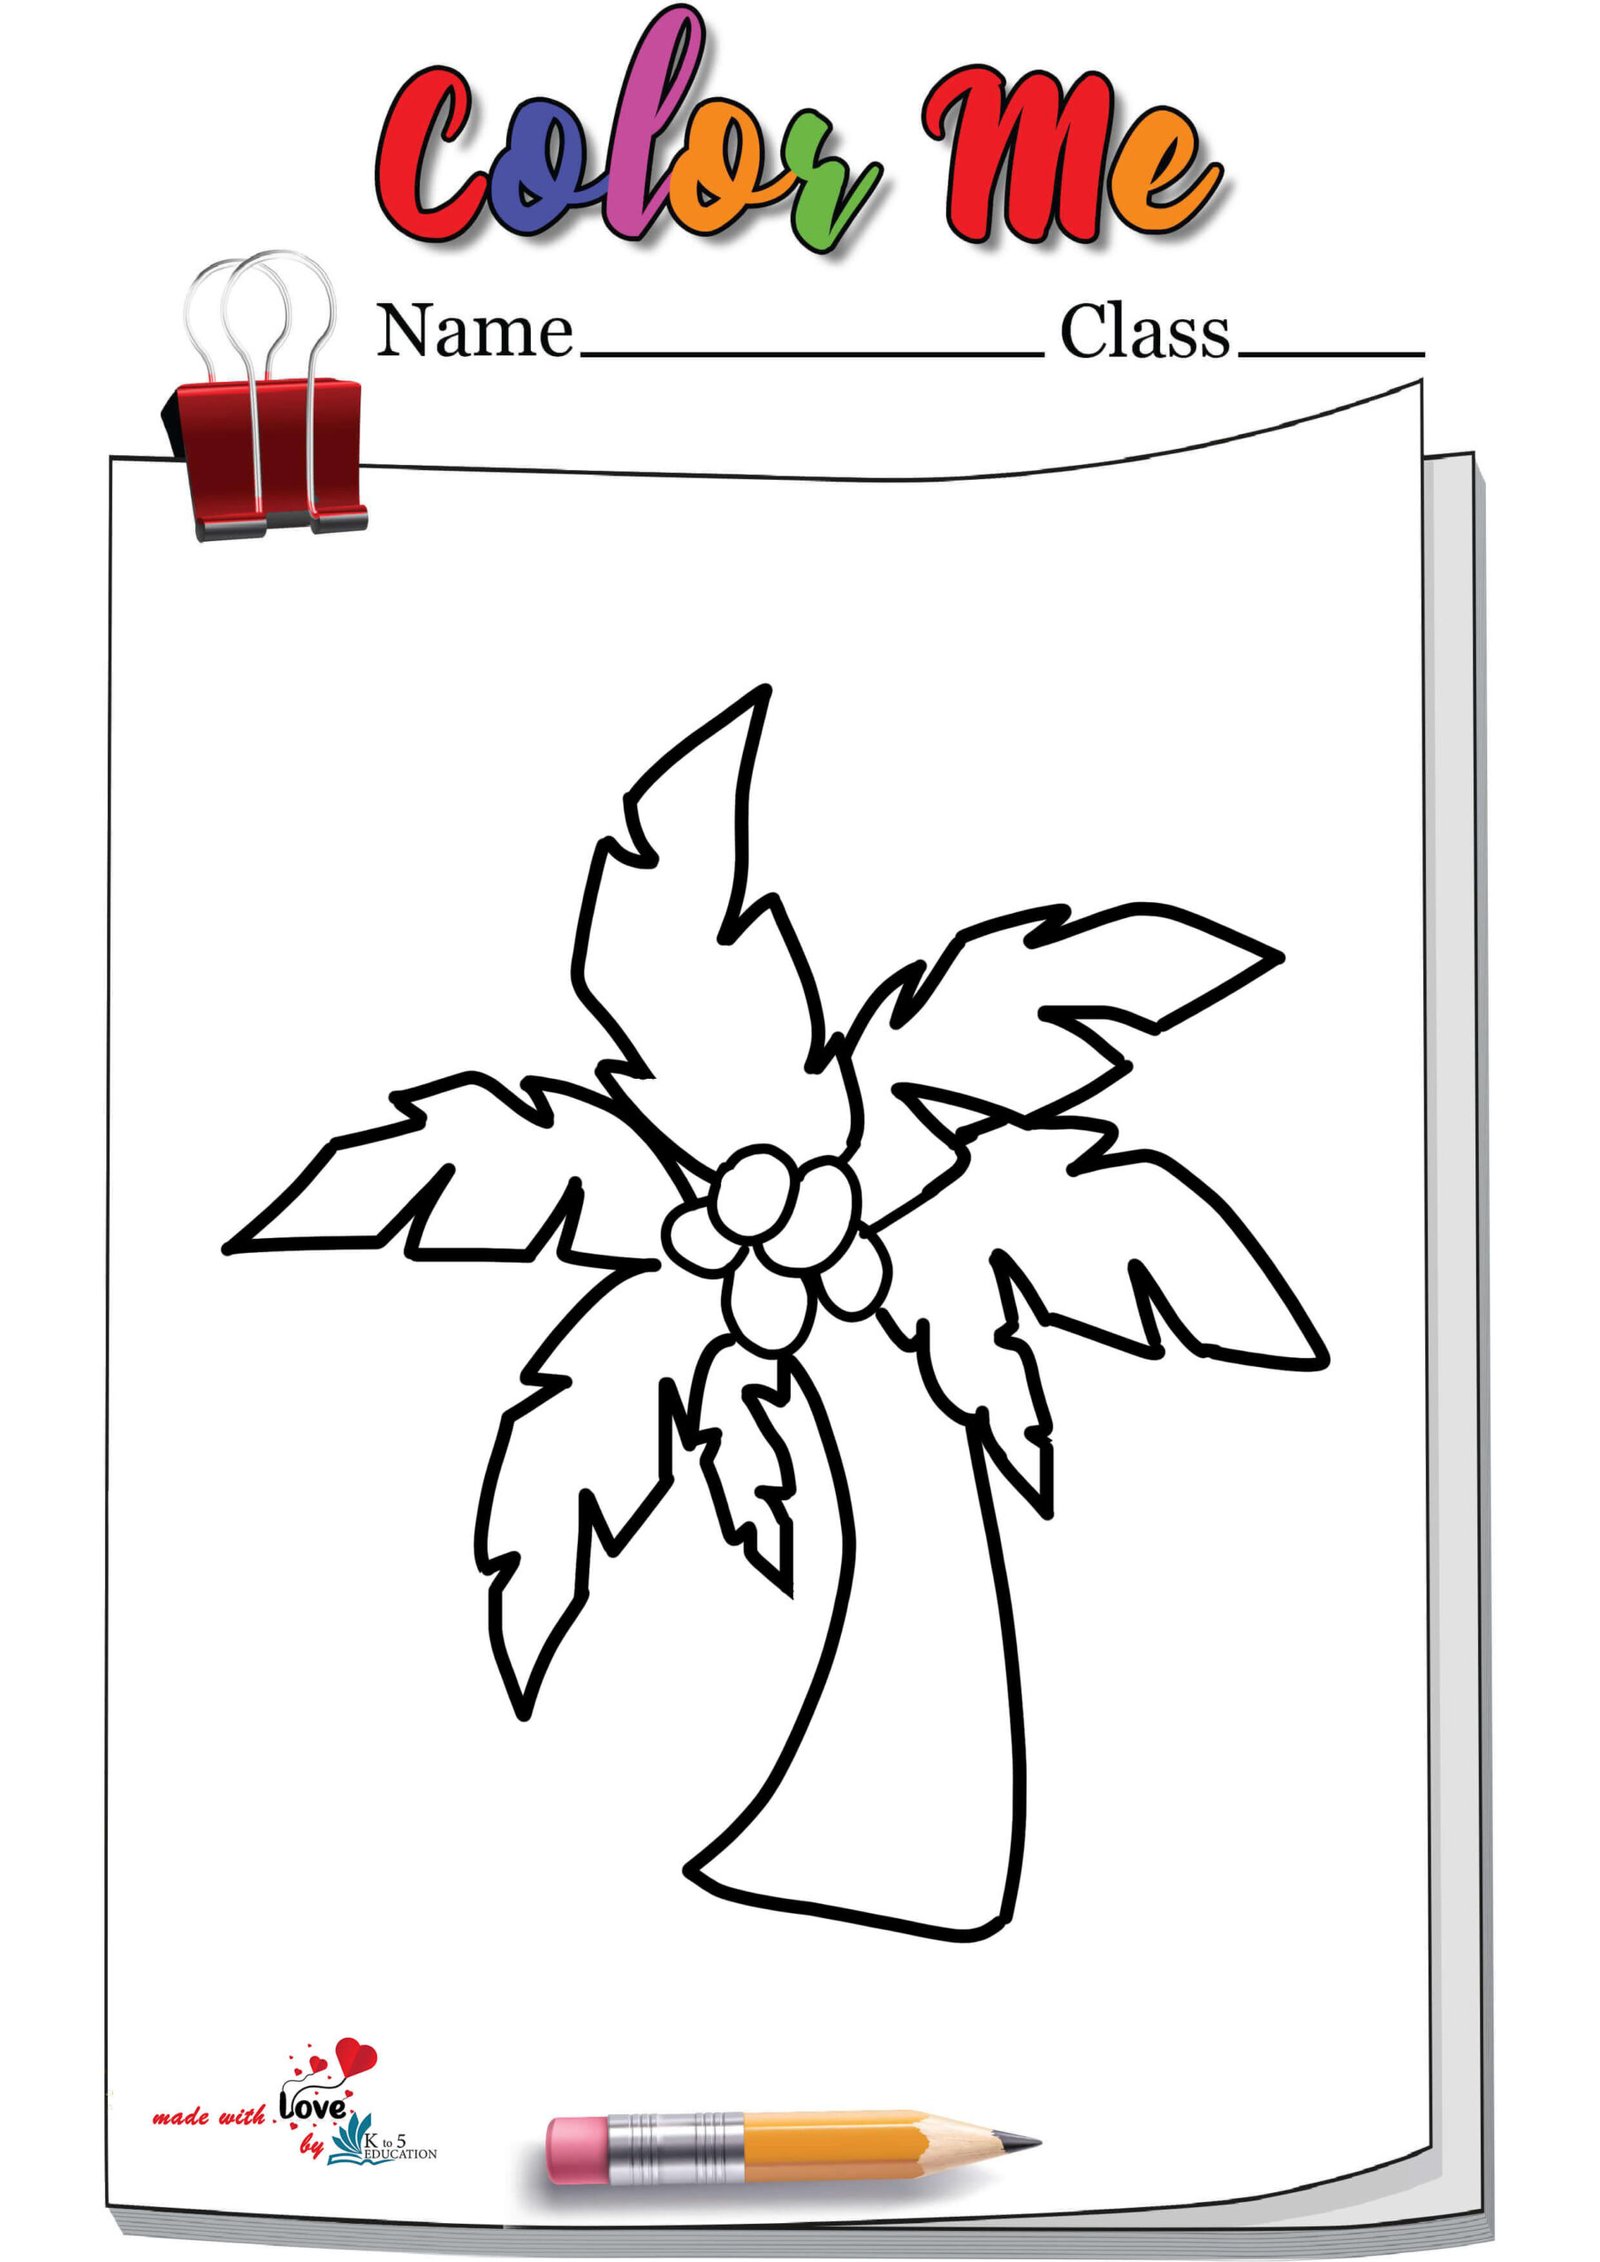 The Chicka Chicka Boom Boom Tree Coloring Page